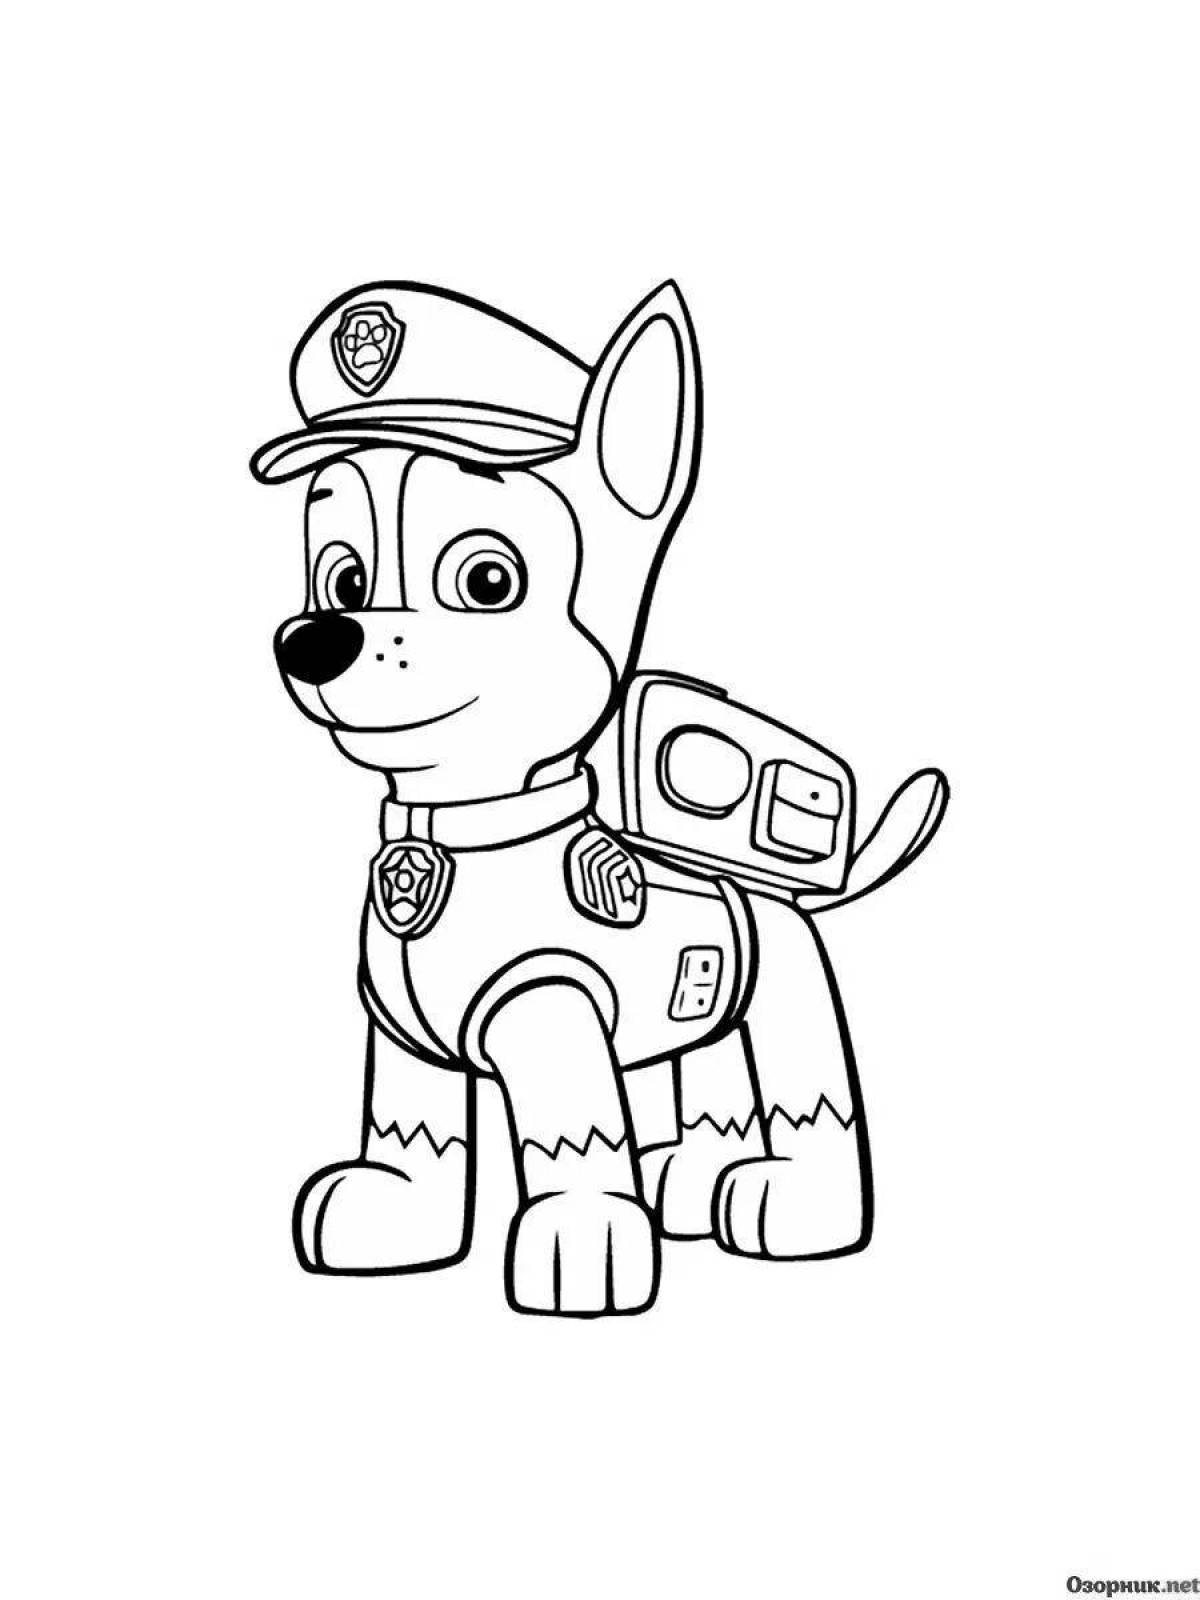 Sweet racer coloring page for kids